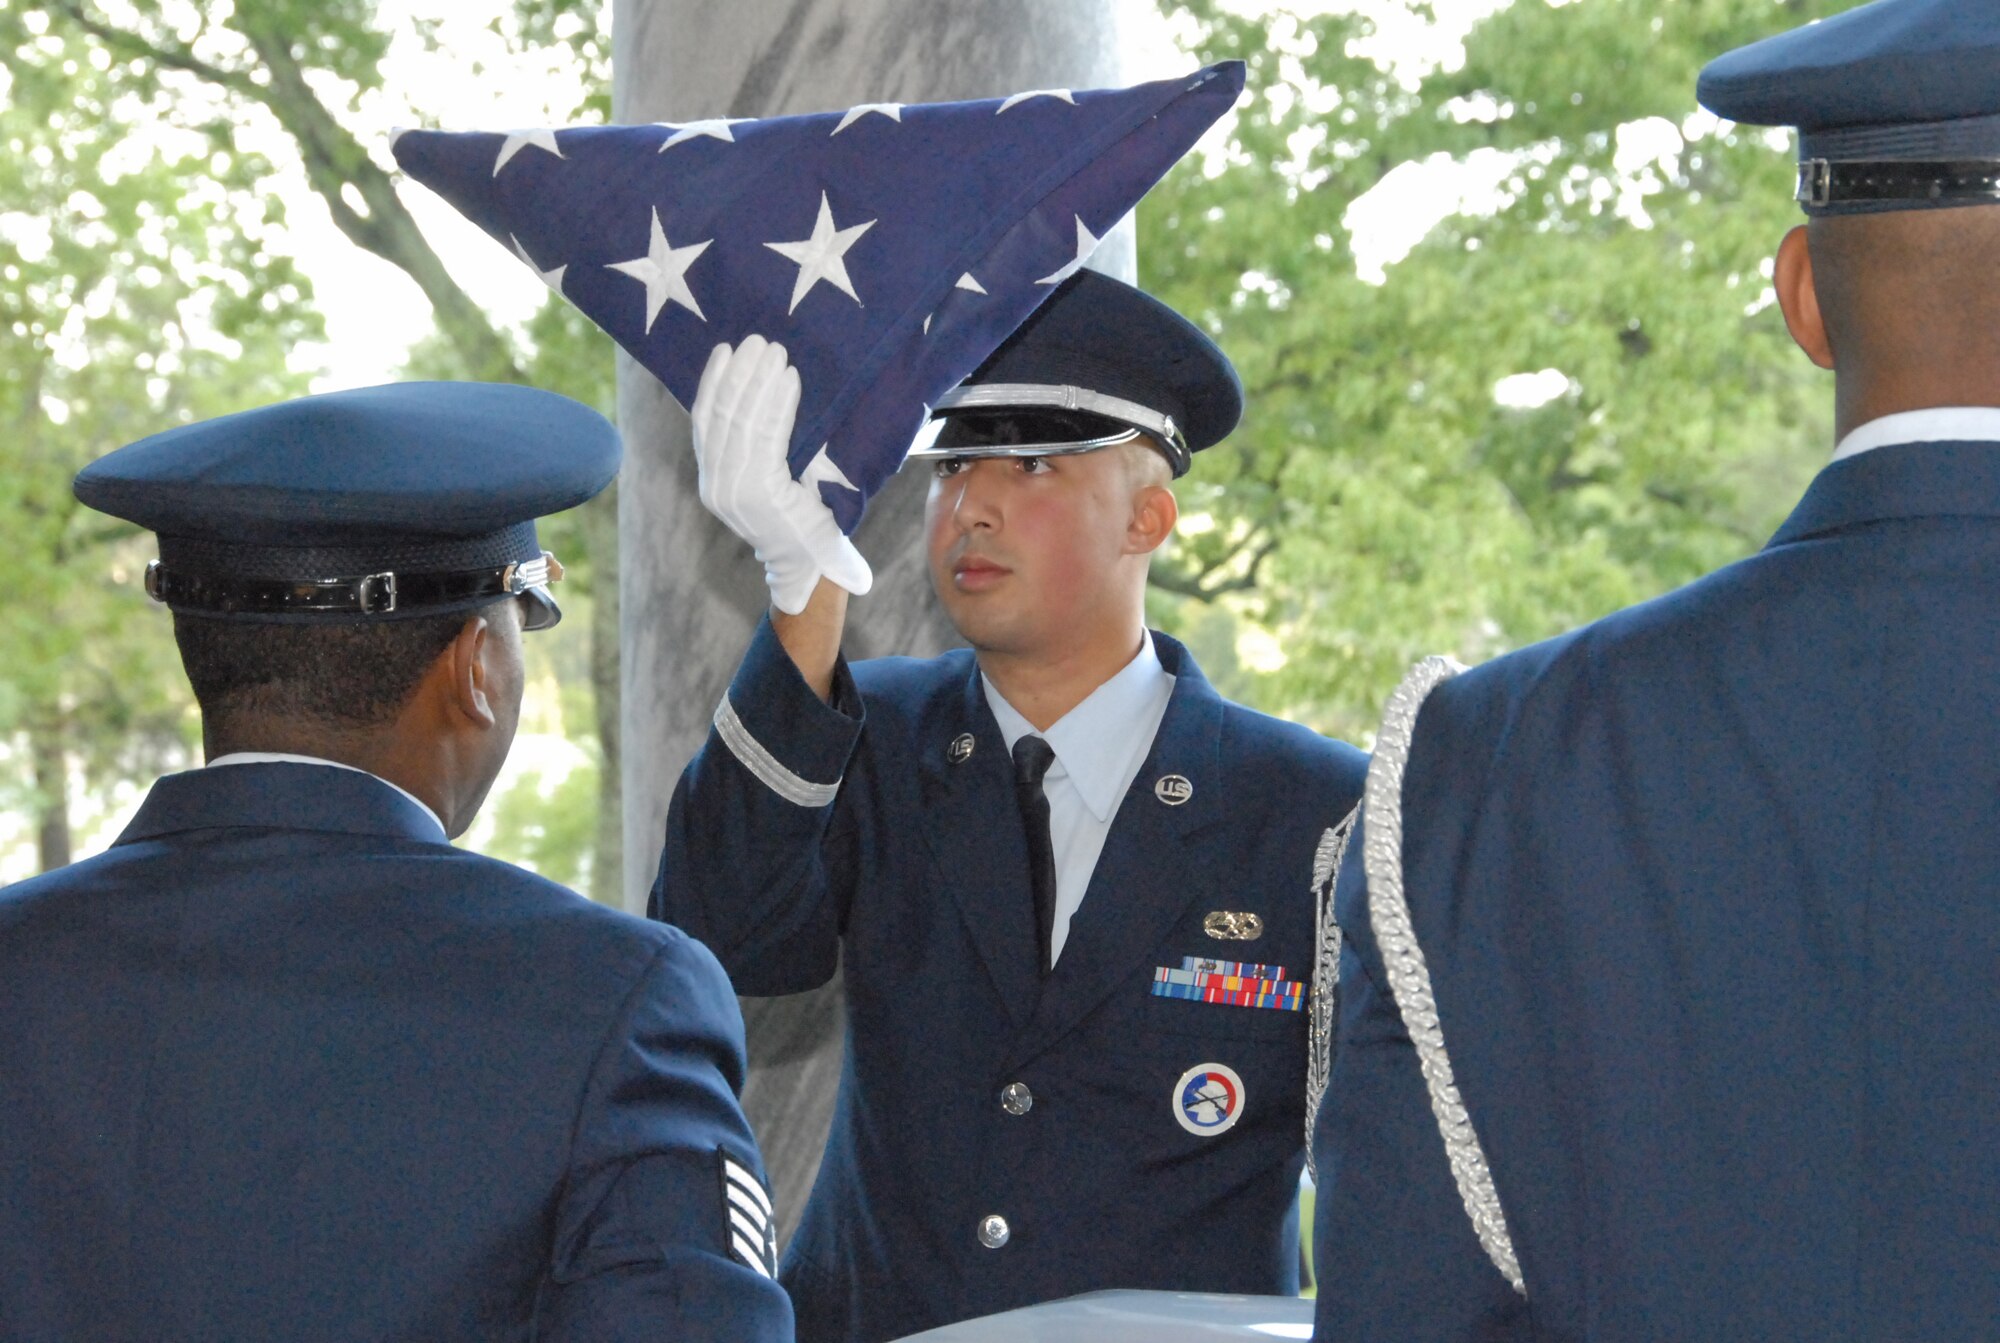 Staff Sgt. Juan Scales said serving in the Honor Guard has given him a deeper appreciation for the Air Force. He is the recipient of the 2008 Chief Master Sergeant of the Air Force Honor Guard Member of the Year award. U.S. Air Force photo by Ray Crayton